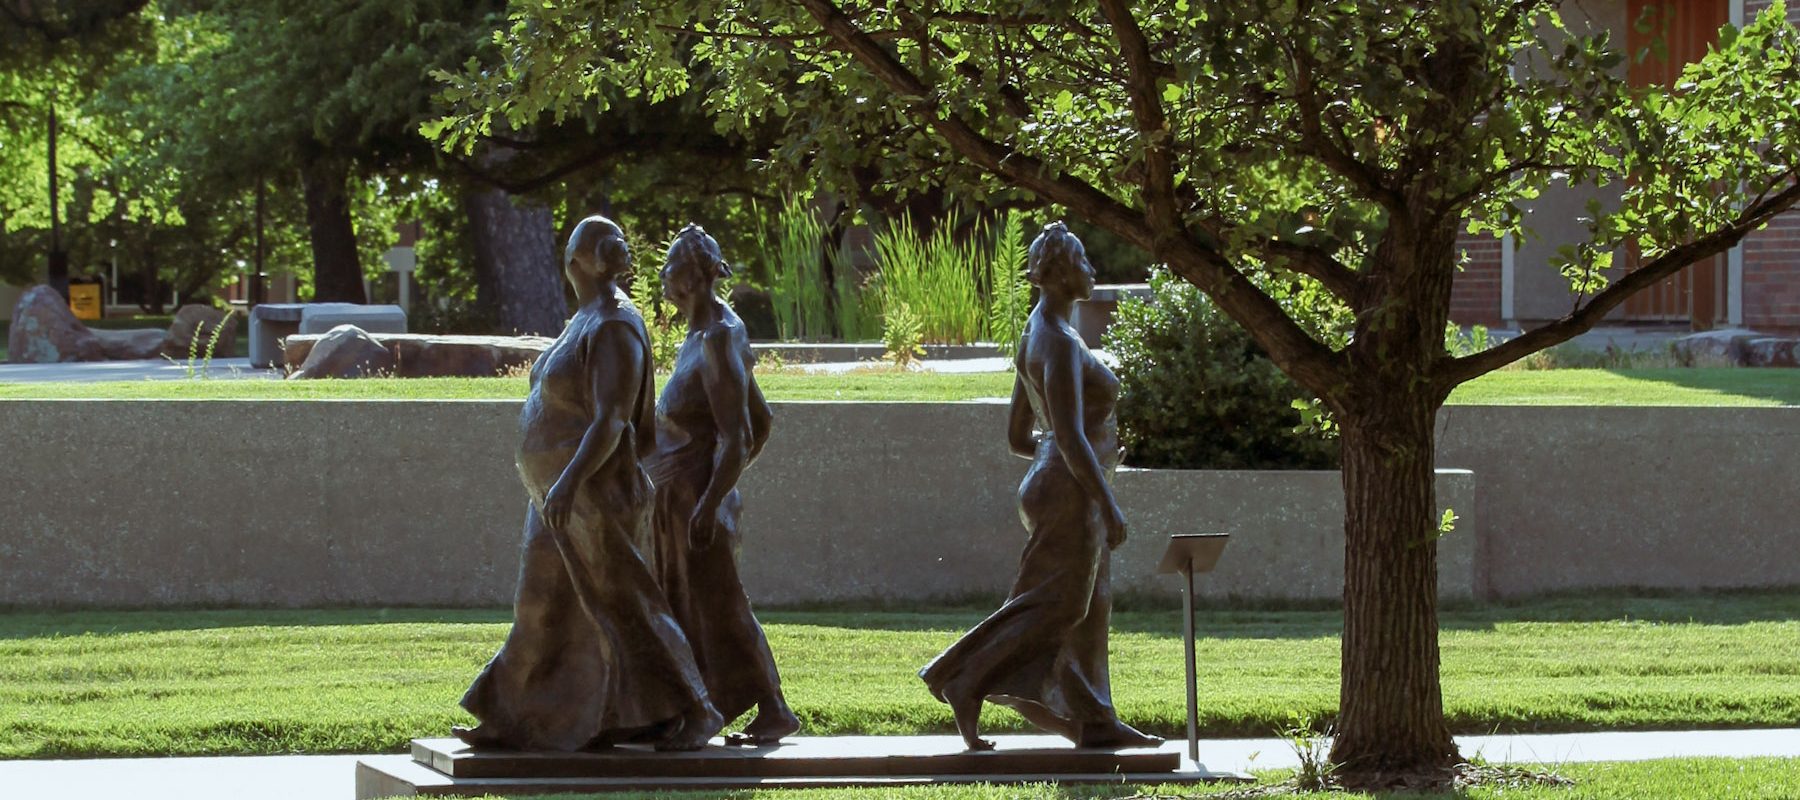 A bronze statue of three walking women is located under a shade tree.